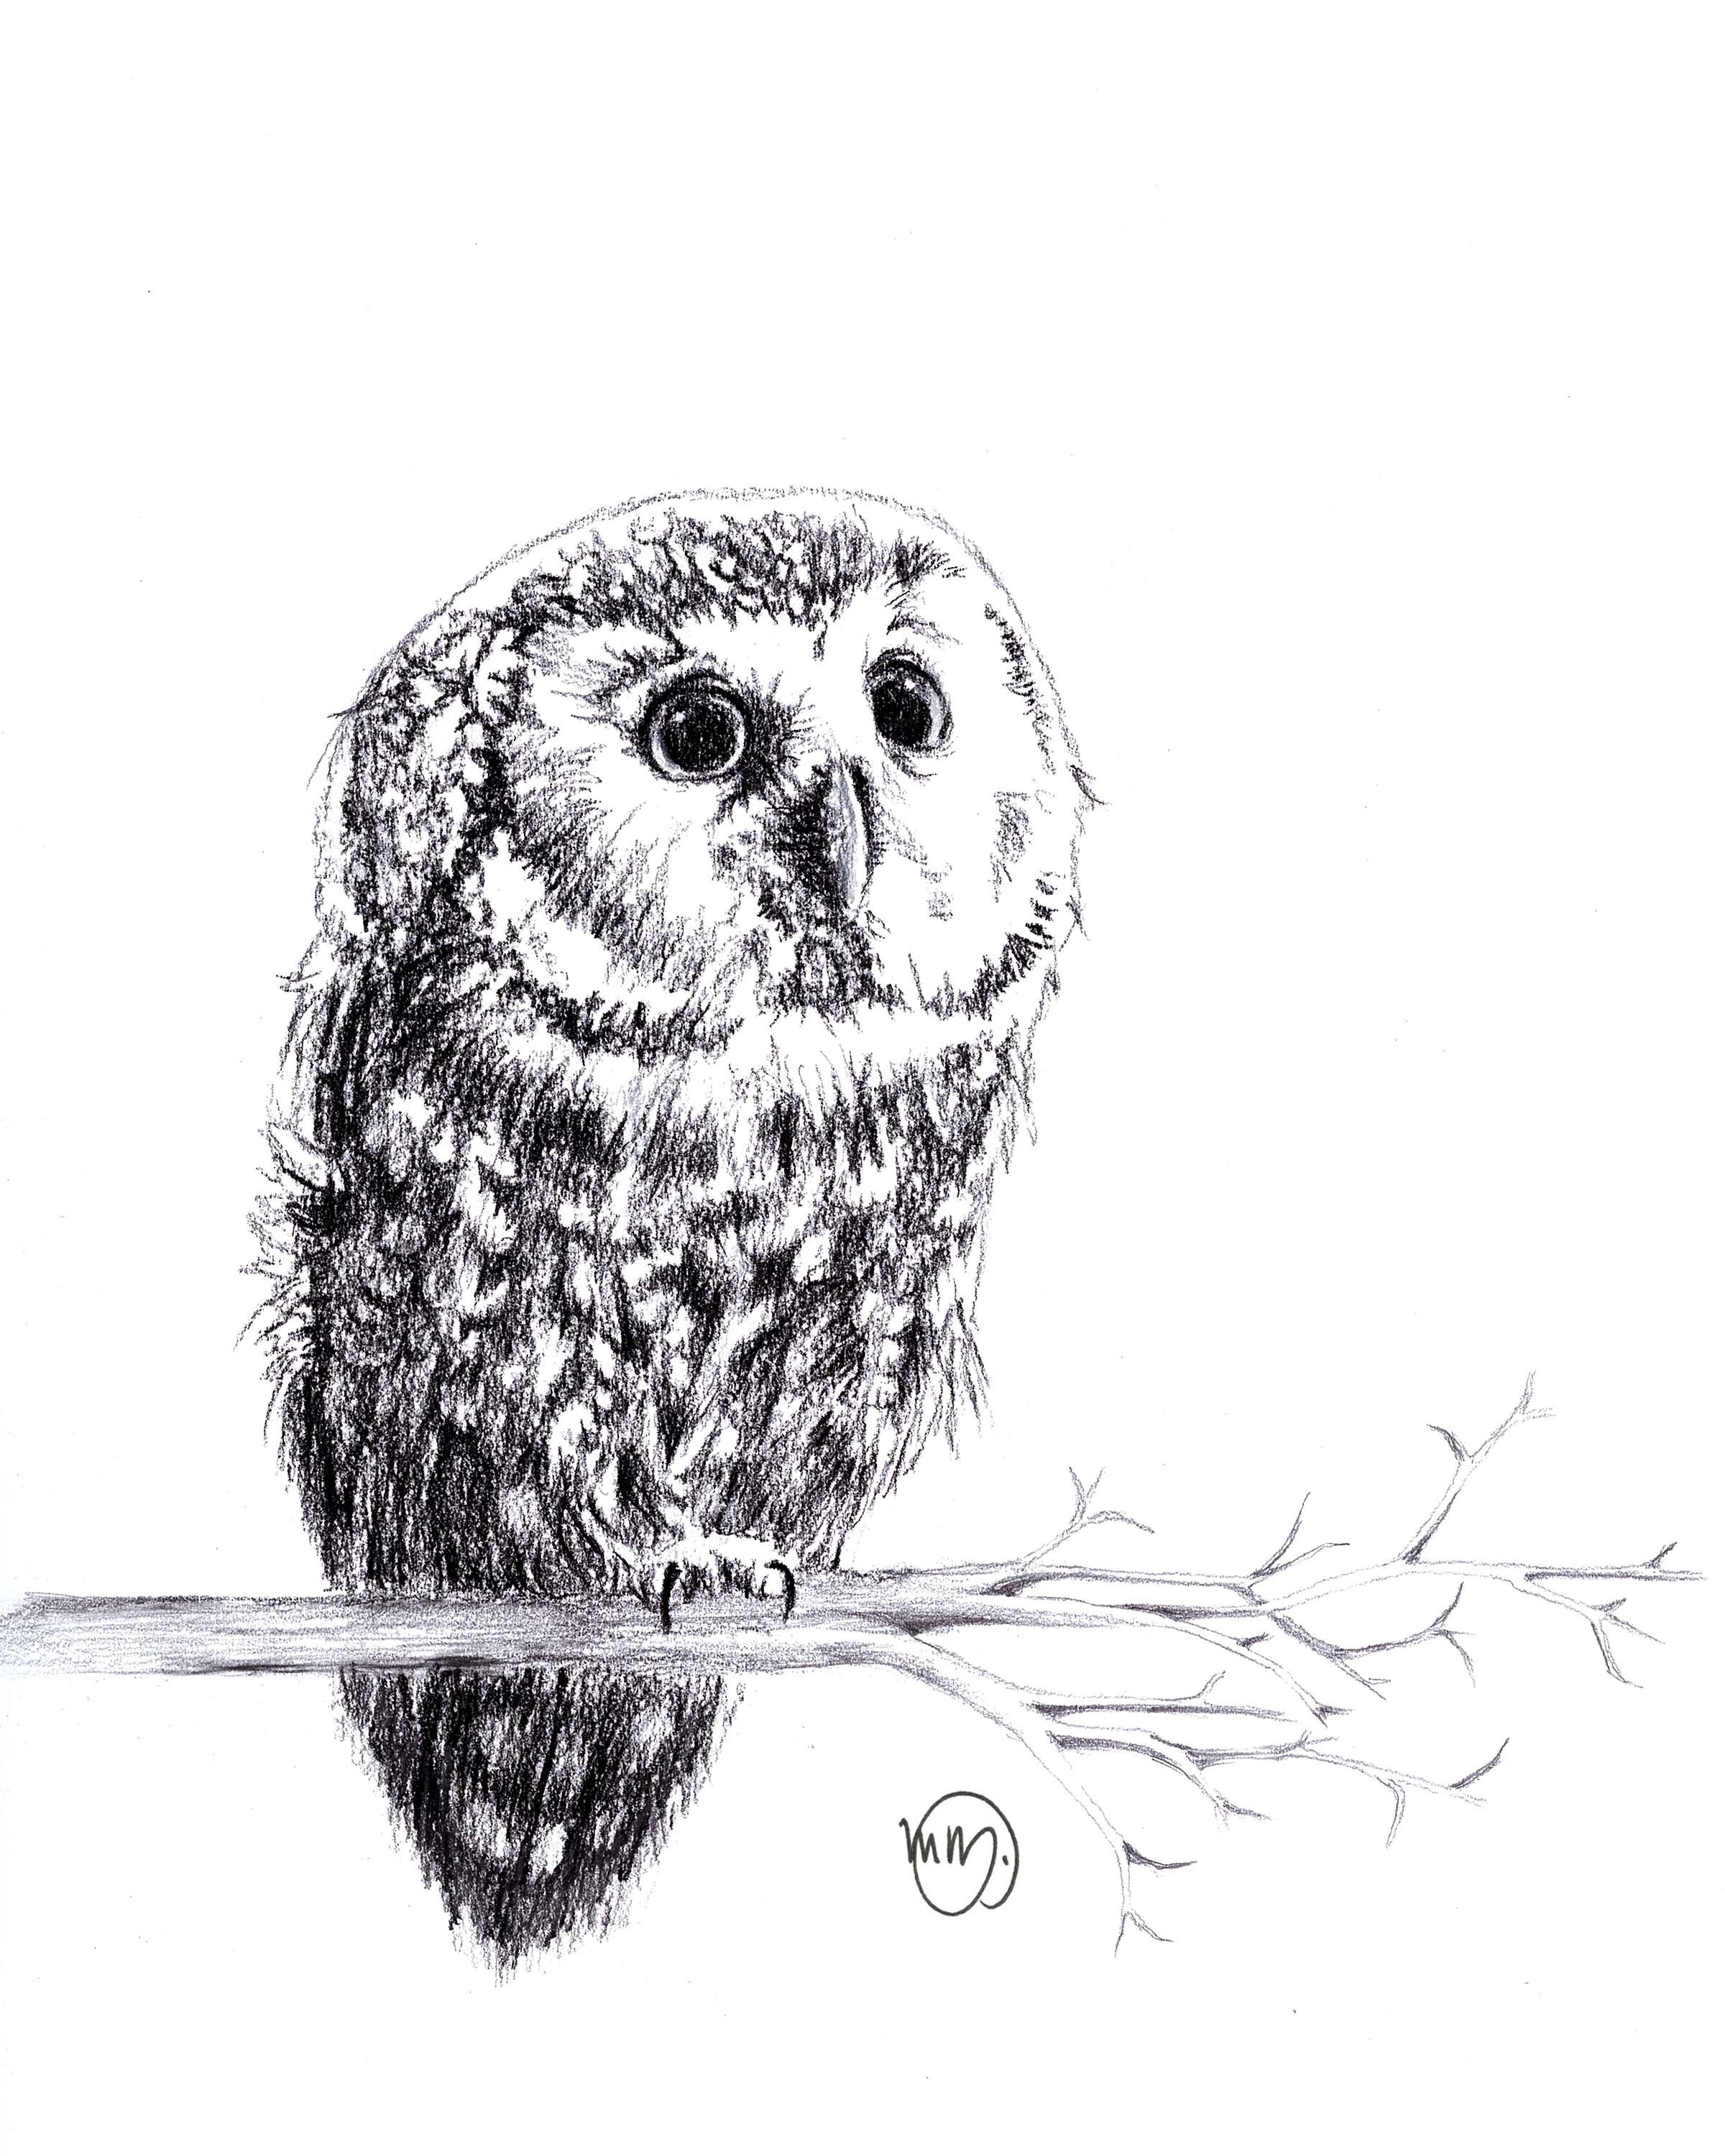 Cute Baby Owl illustration - Wildlife illustration by LE NID atelier